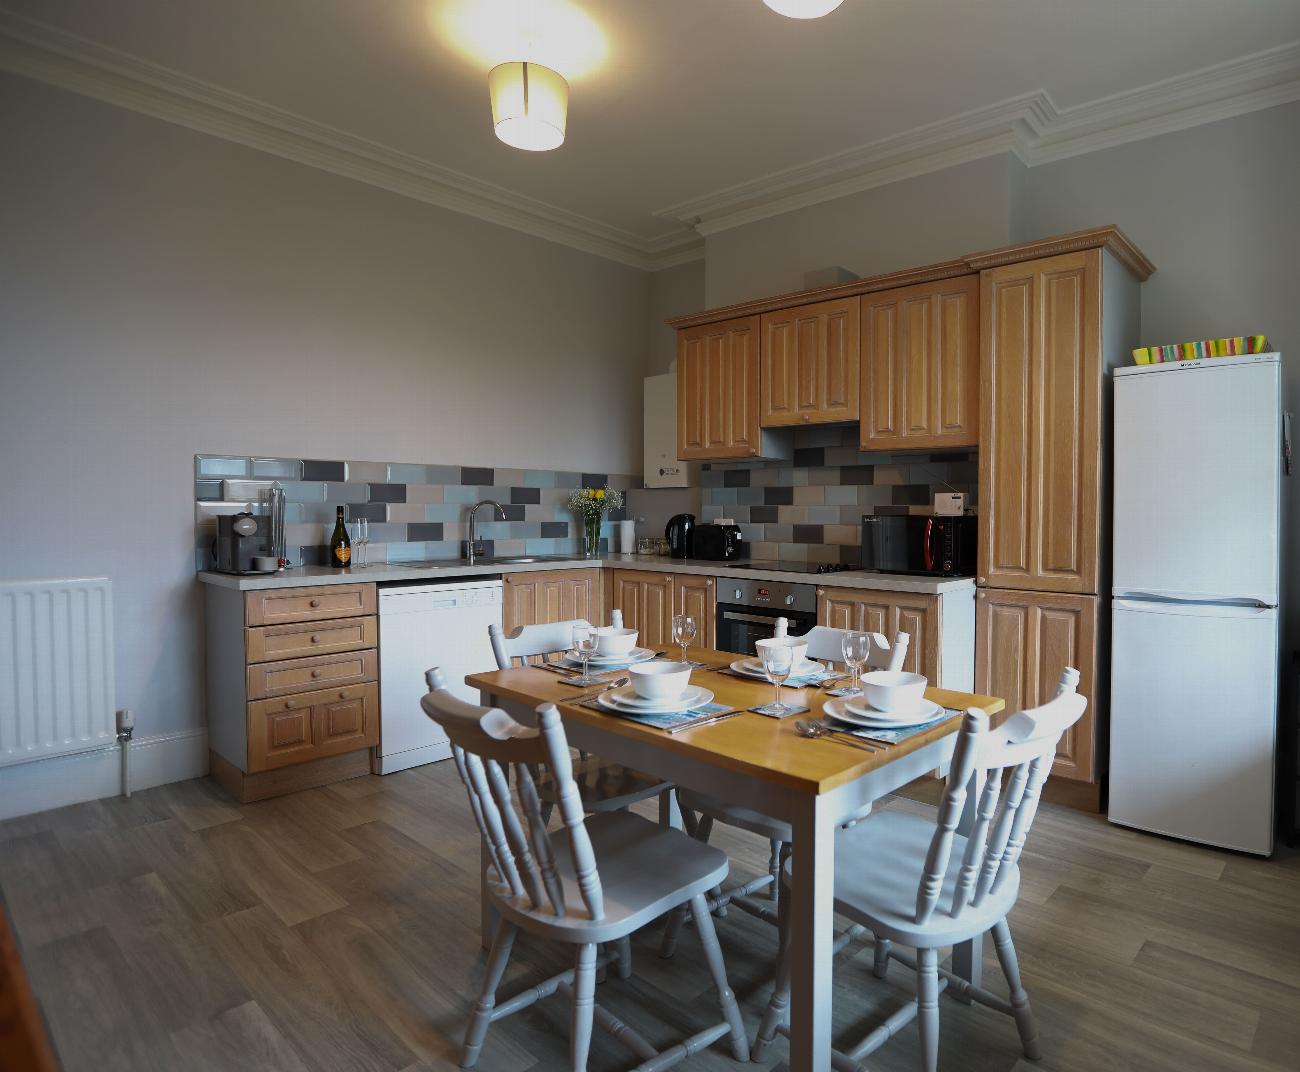 Self-Catering Accommodation in Bideford | Woodside Apartments gallery image 2